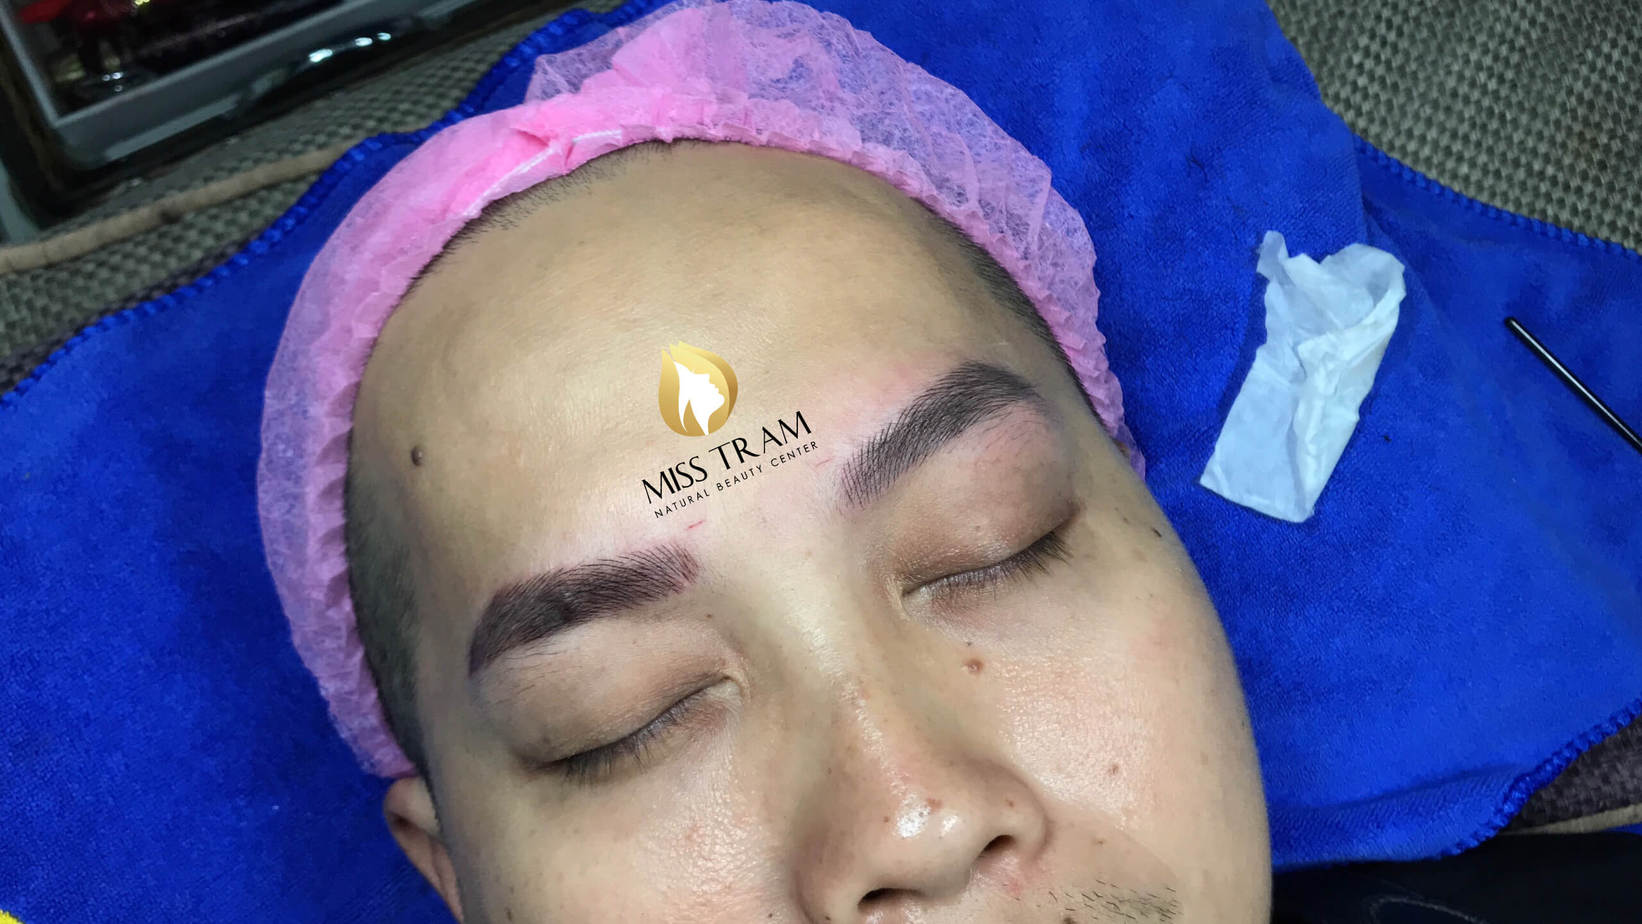 Review of male eyebrow sculpture at Miss Tram is now really good and reputable